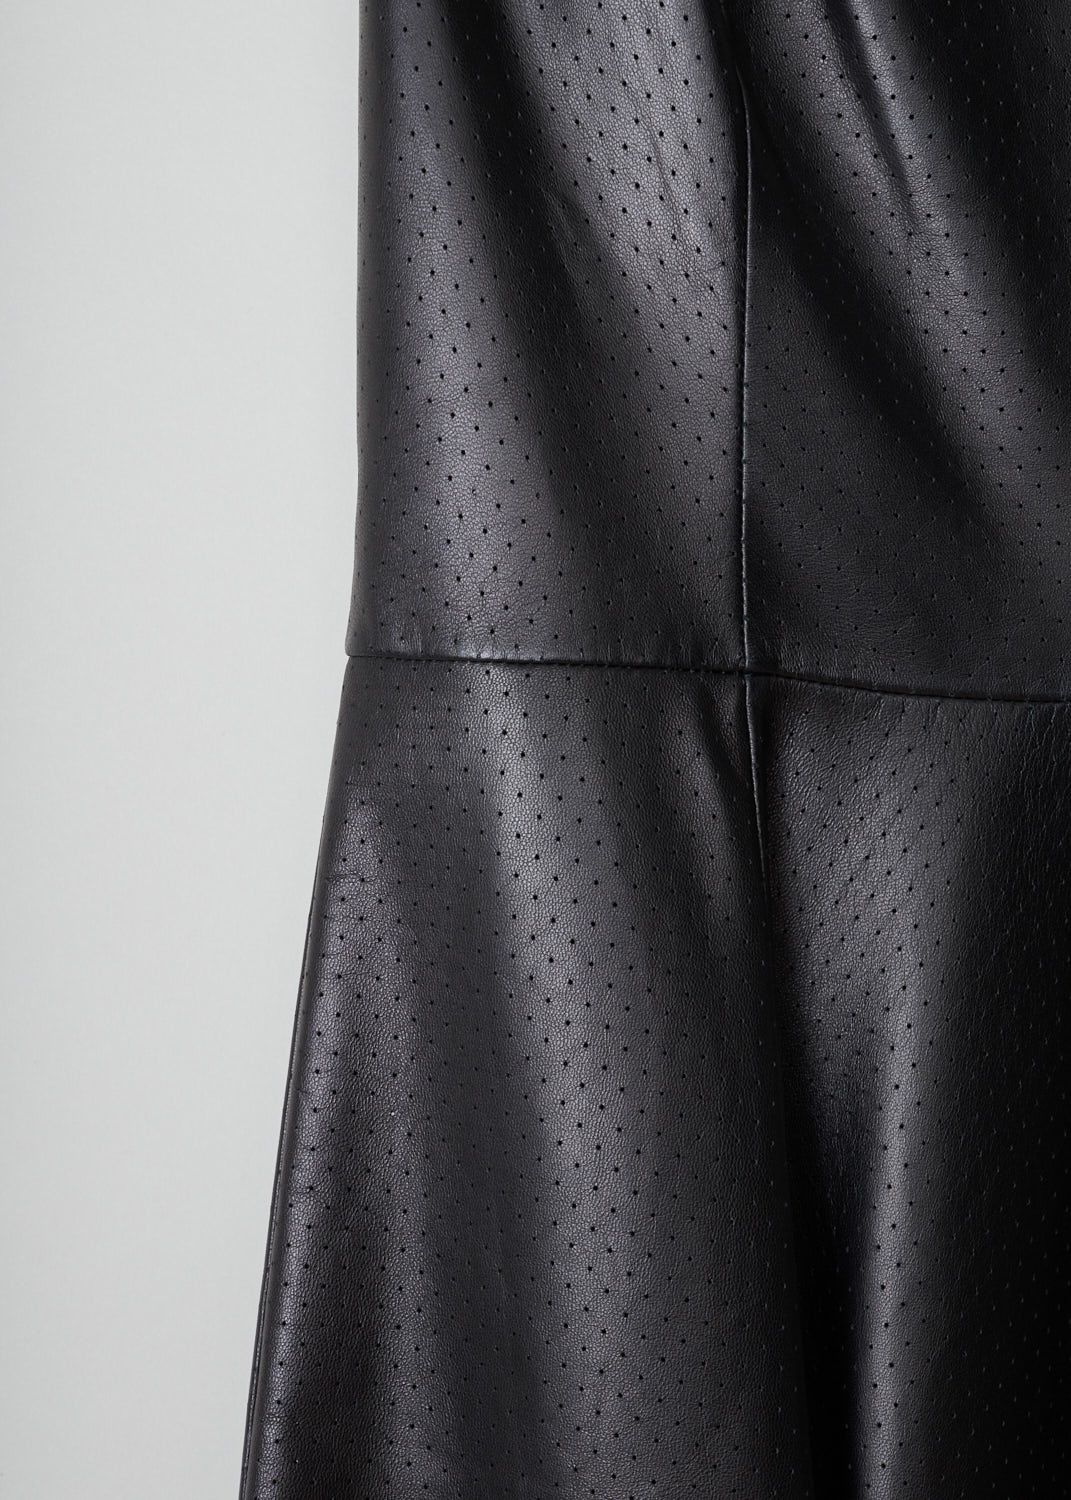 Prada, Perforated black leather dress, nappa_53279_F0002_nero, black, detail, Black leather is perforated to get this special look. the dress is modeled after a princess dress and has a pleated skirt. Furthermore it has a round neckline without sleeves. A concealed zipper can be found in the side seam.